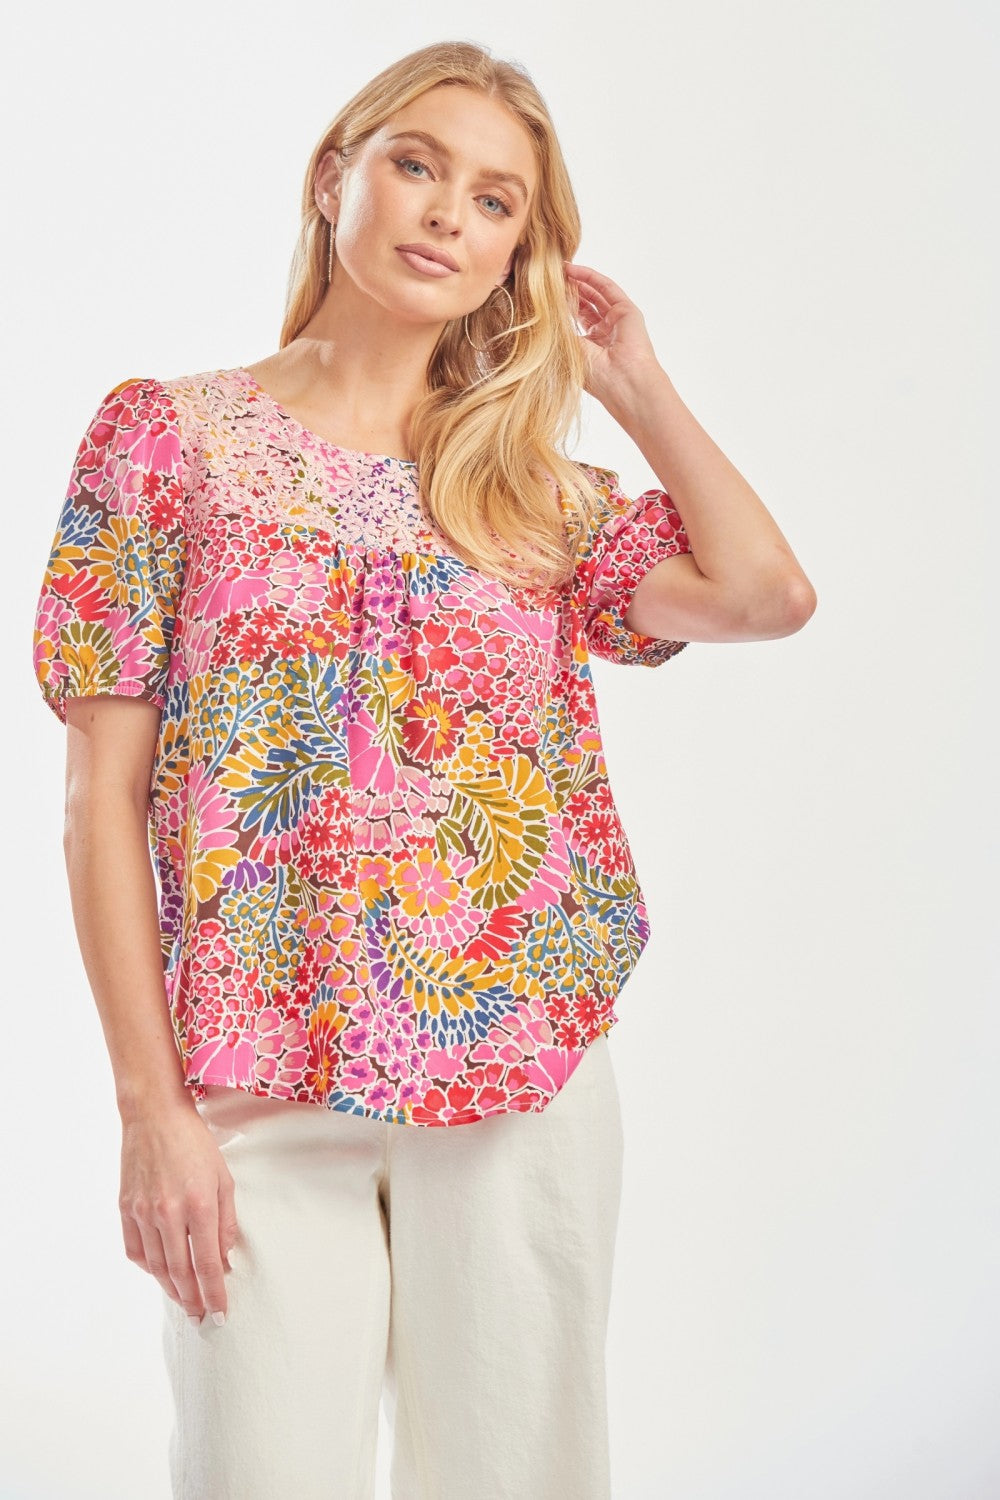 It's a Beautiful Summer Day Embroidered Top